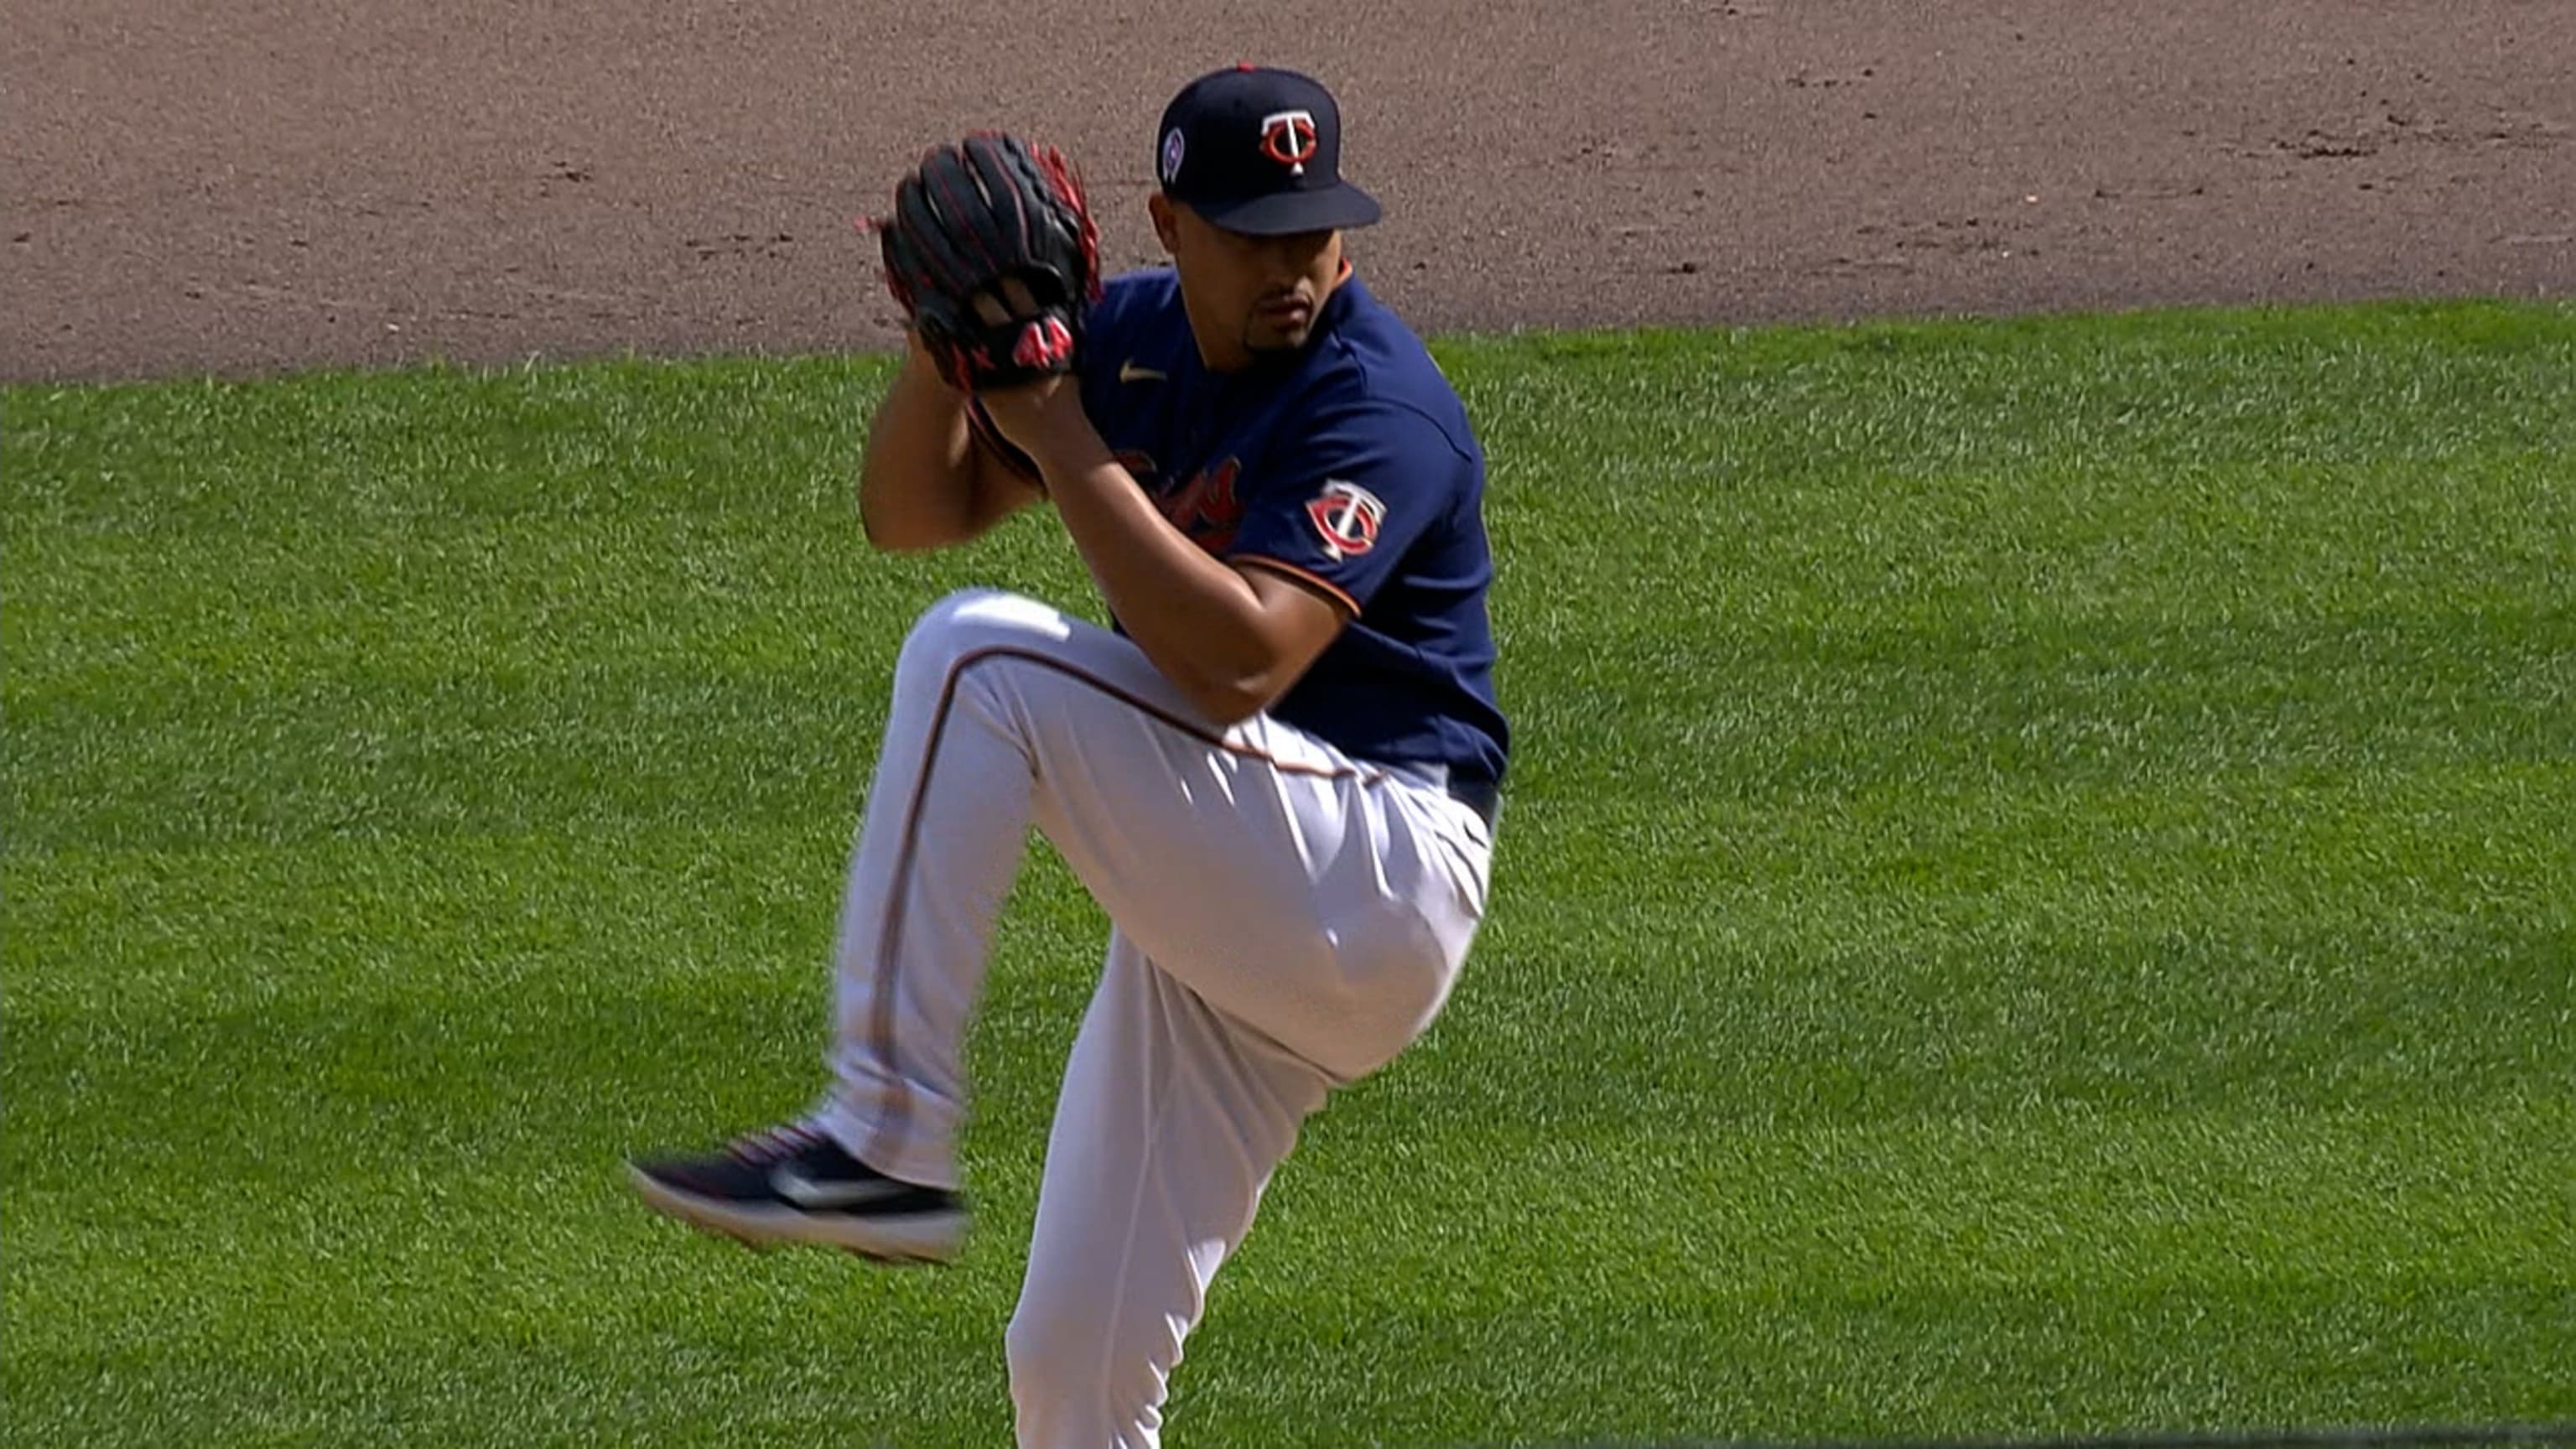 Jhoan Duran as a Twins starter? Not likely, says Rocco Baldelli